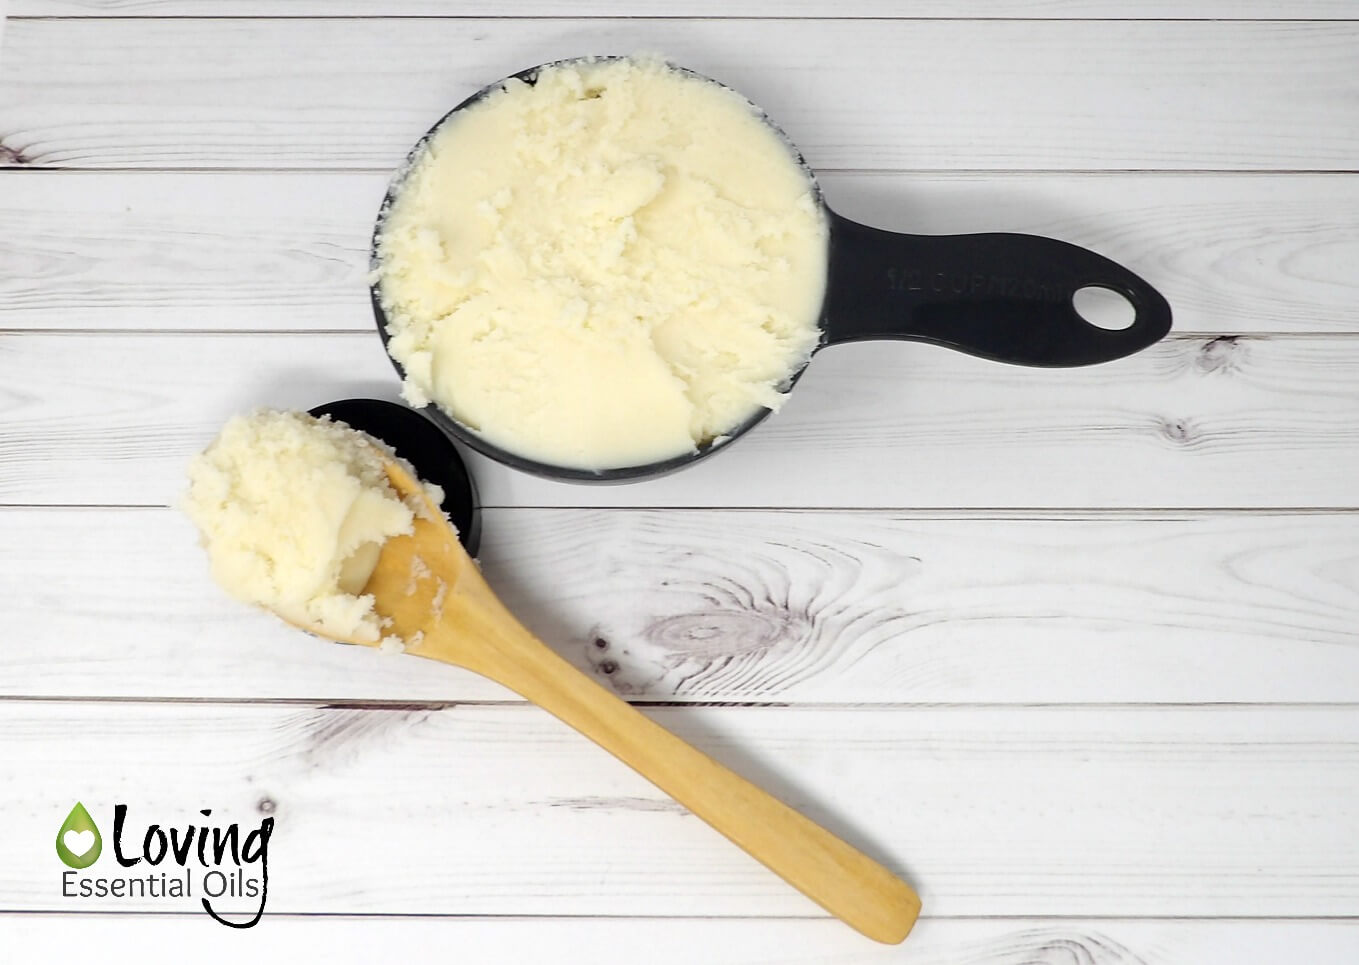 Best Way to Whip Shea Butter by Loving Essential Oils